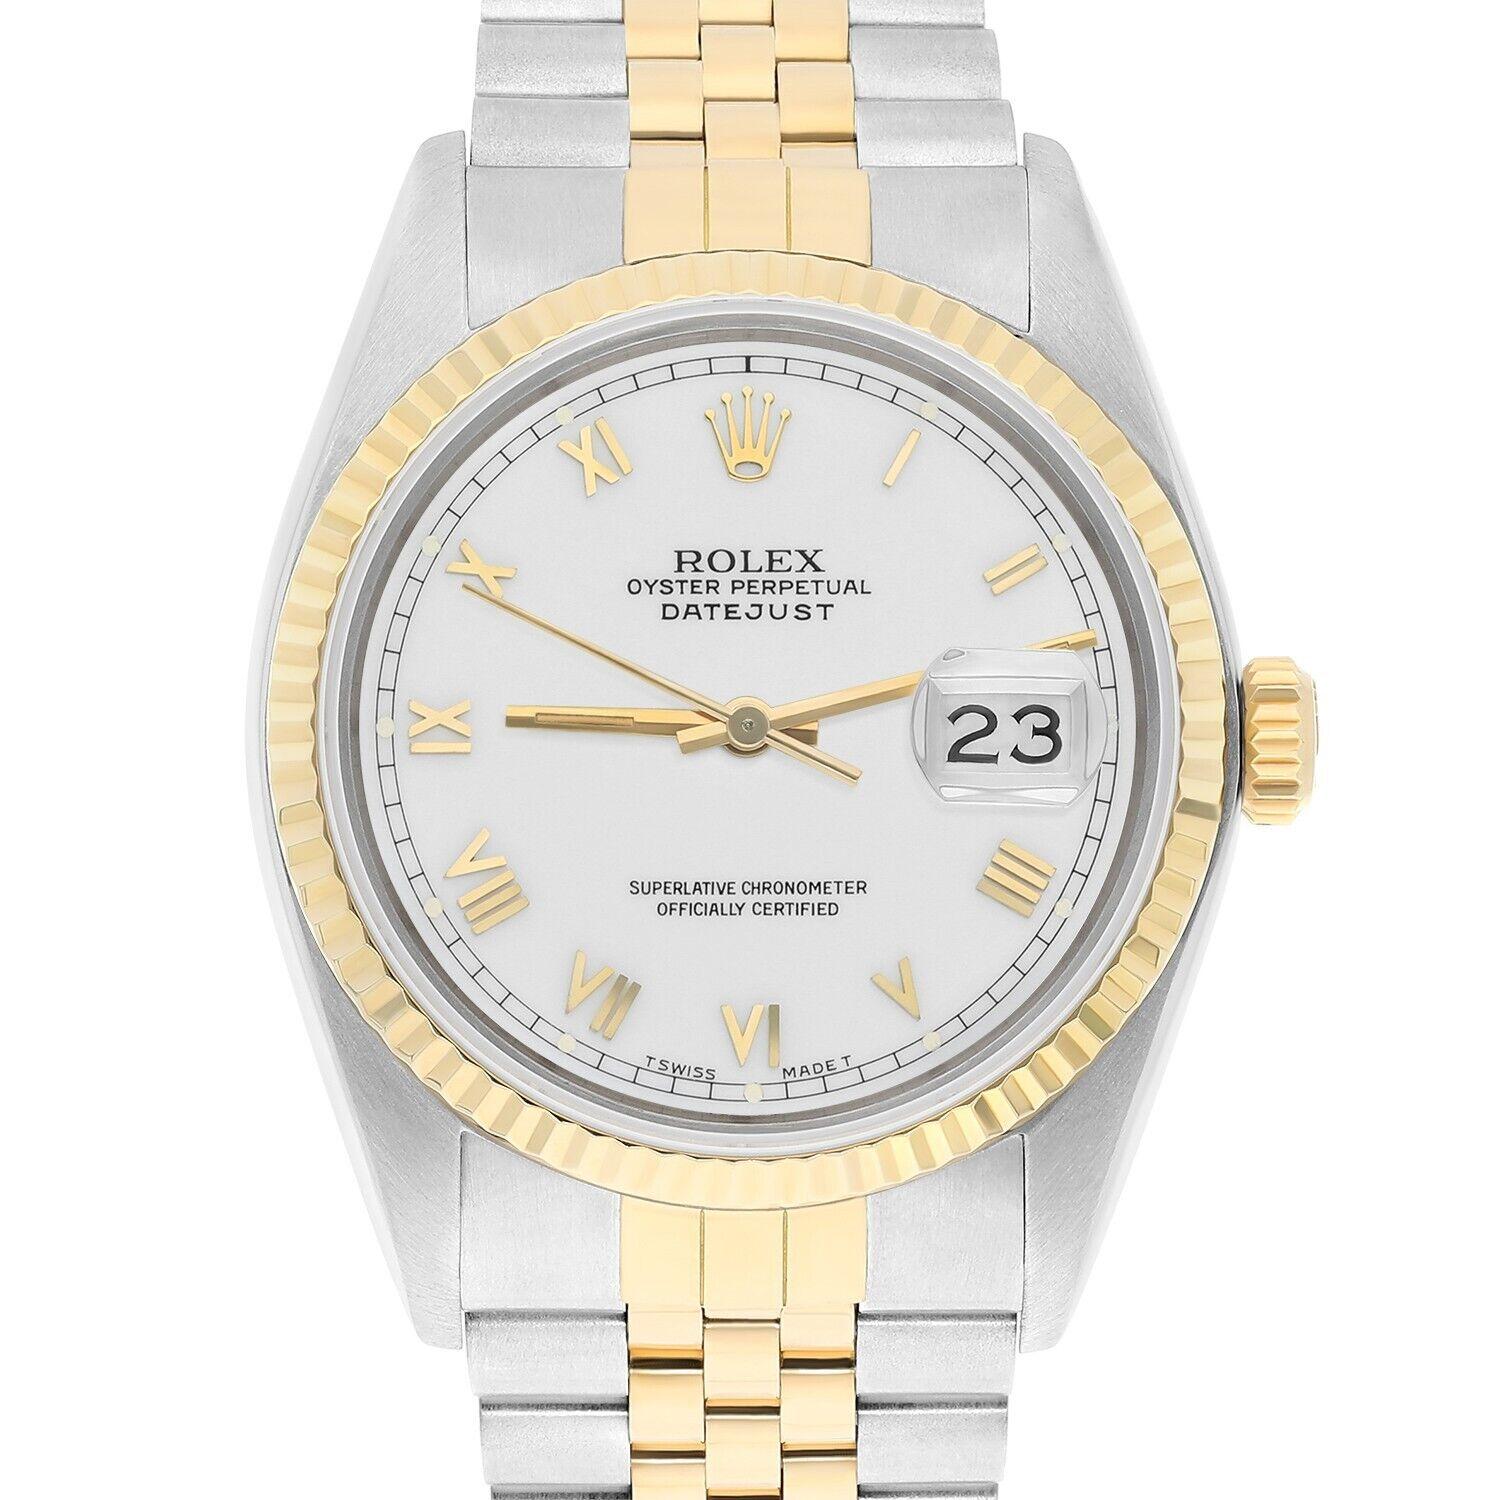 Rolex Datejust 36mm Two Tone White Roman Numeral Dial Jubilee 16233 Circa 1990 For Sale